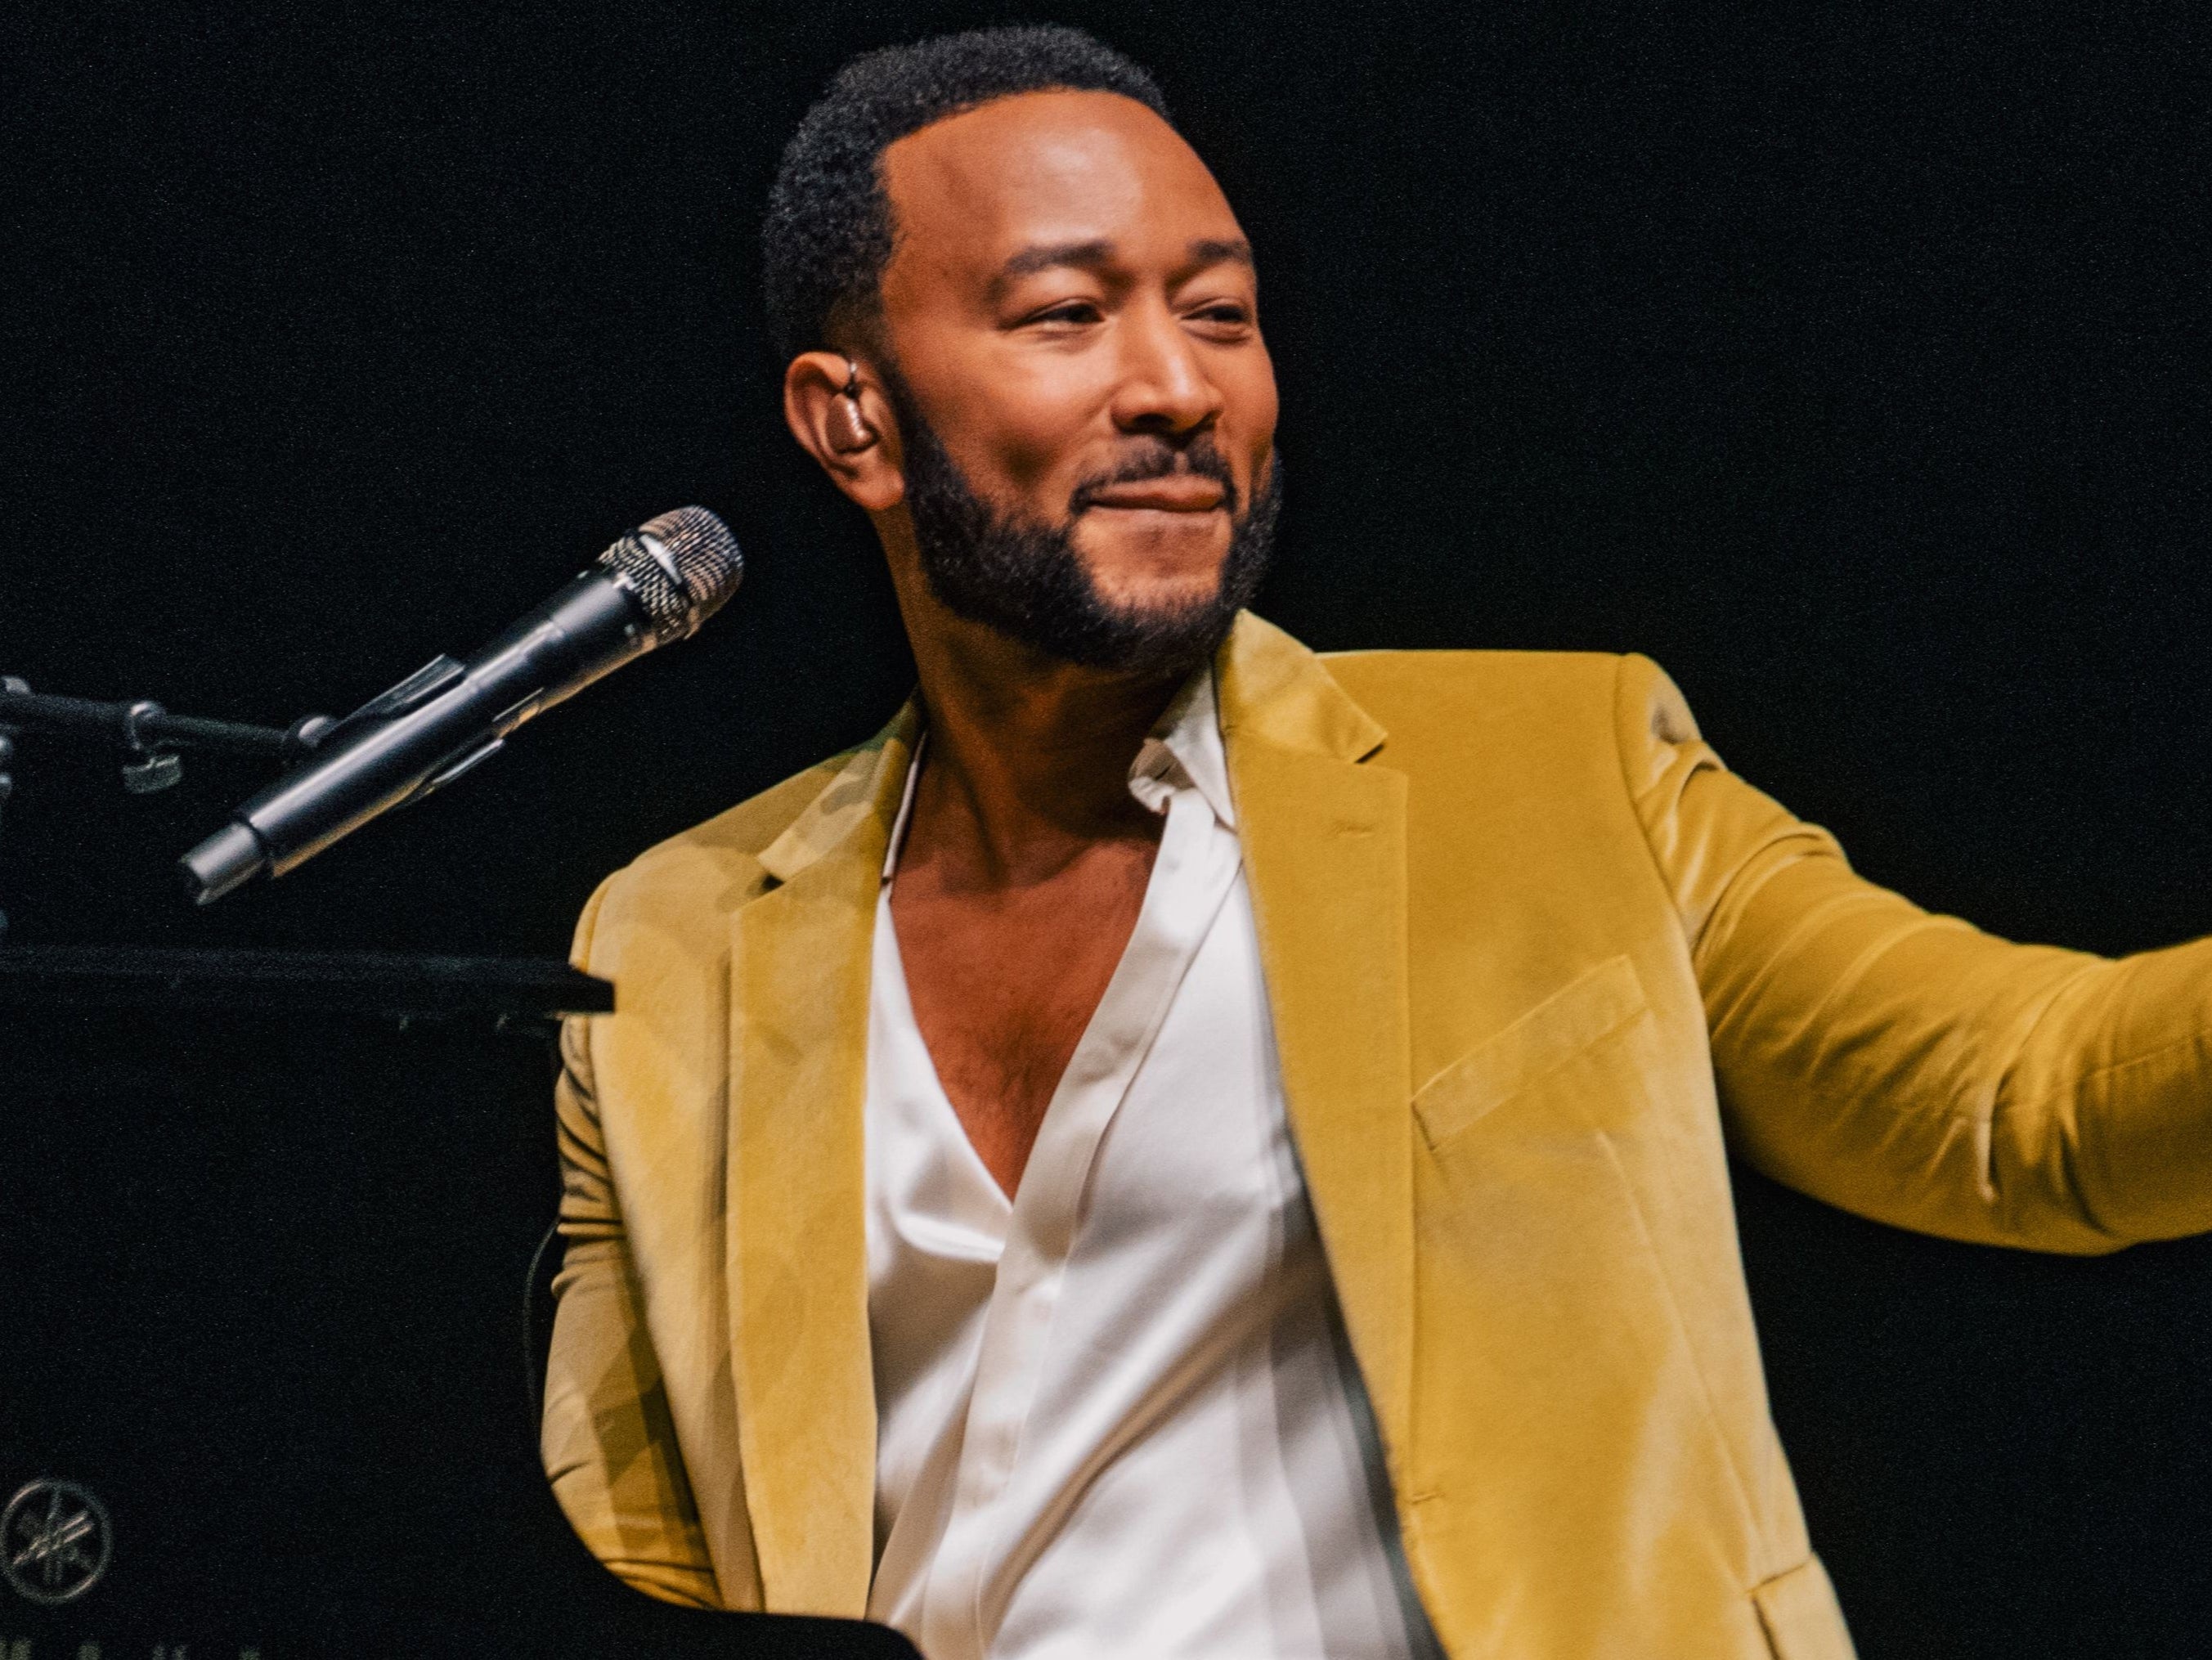 John Legend performed his Royal Albert Hall show alone with no accompaniment